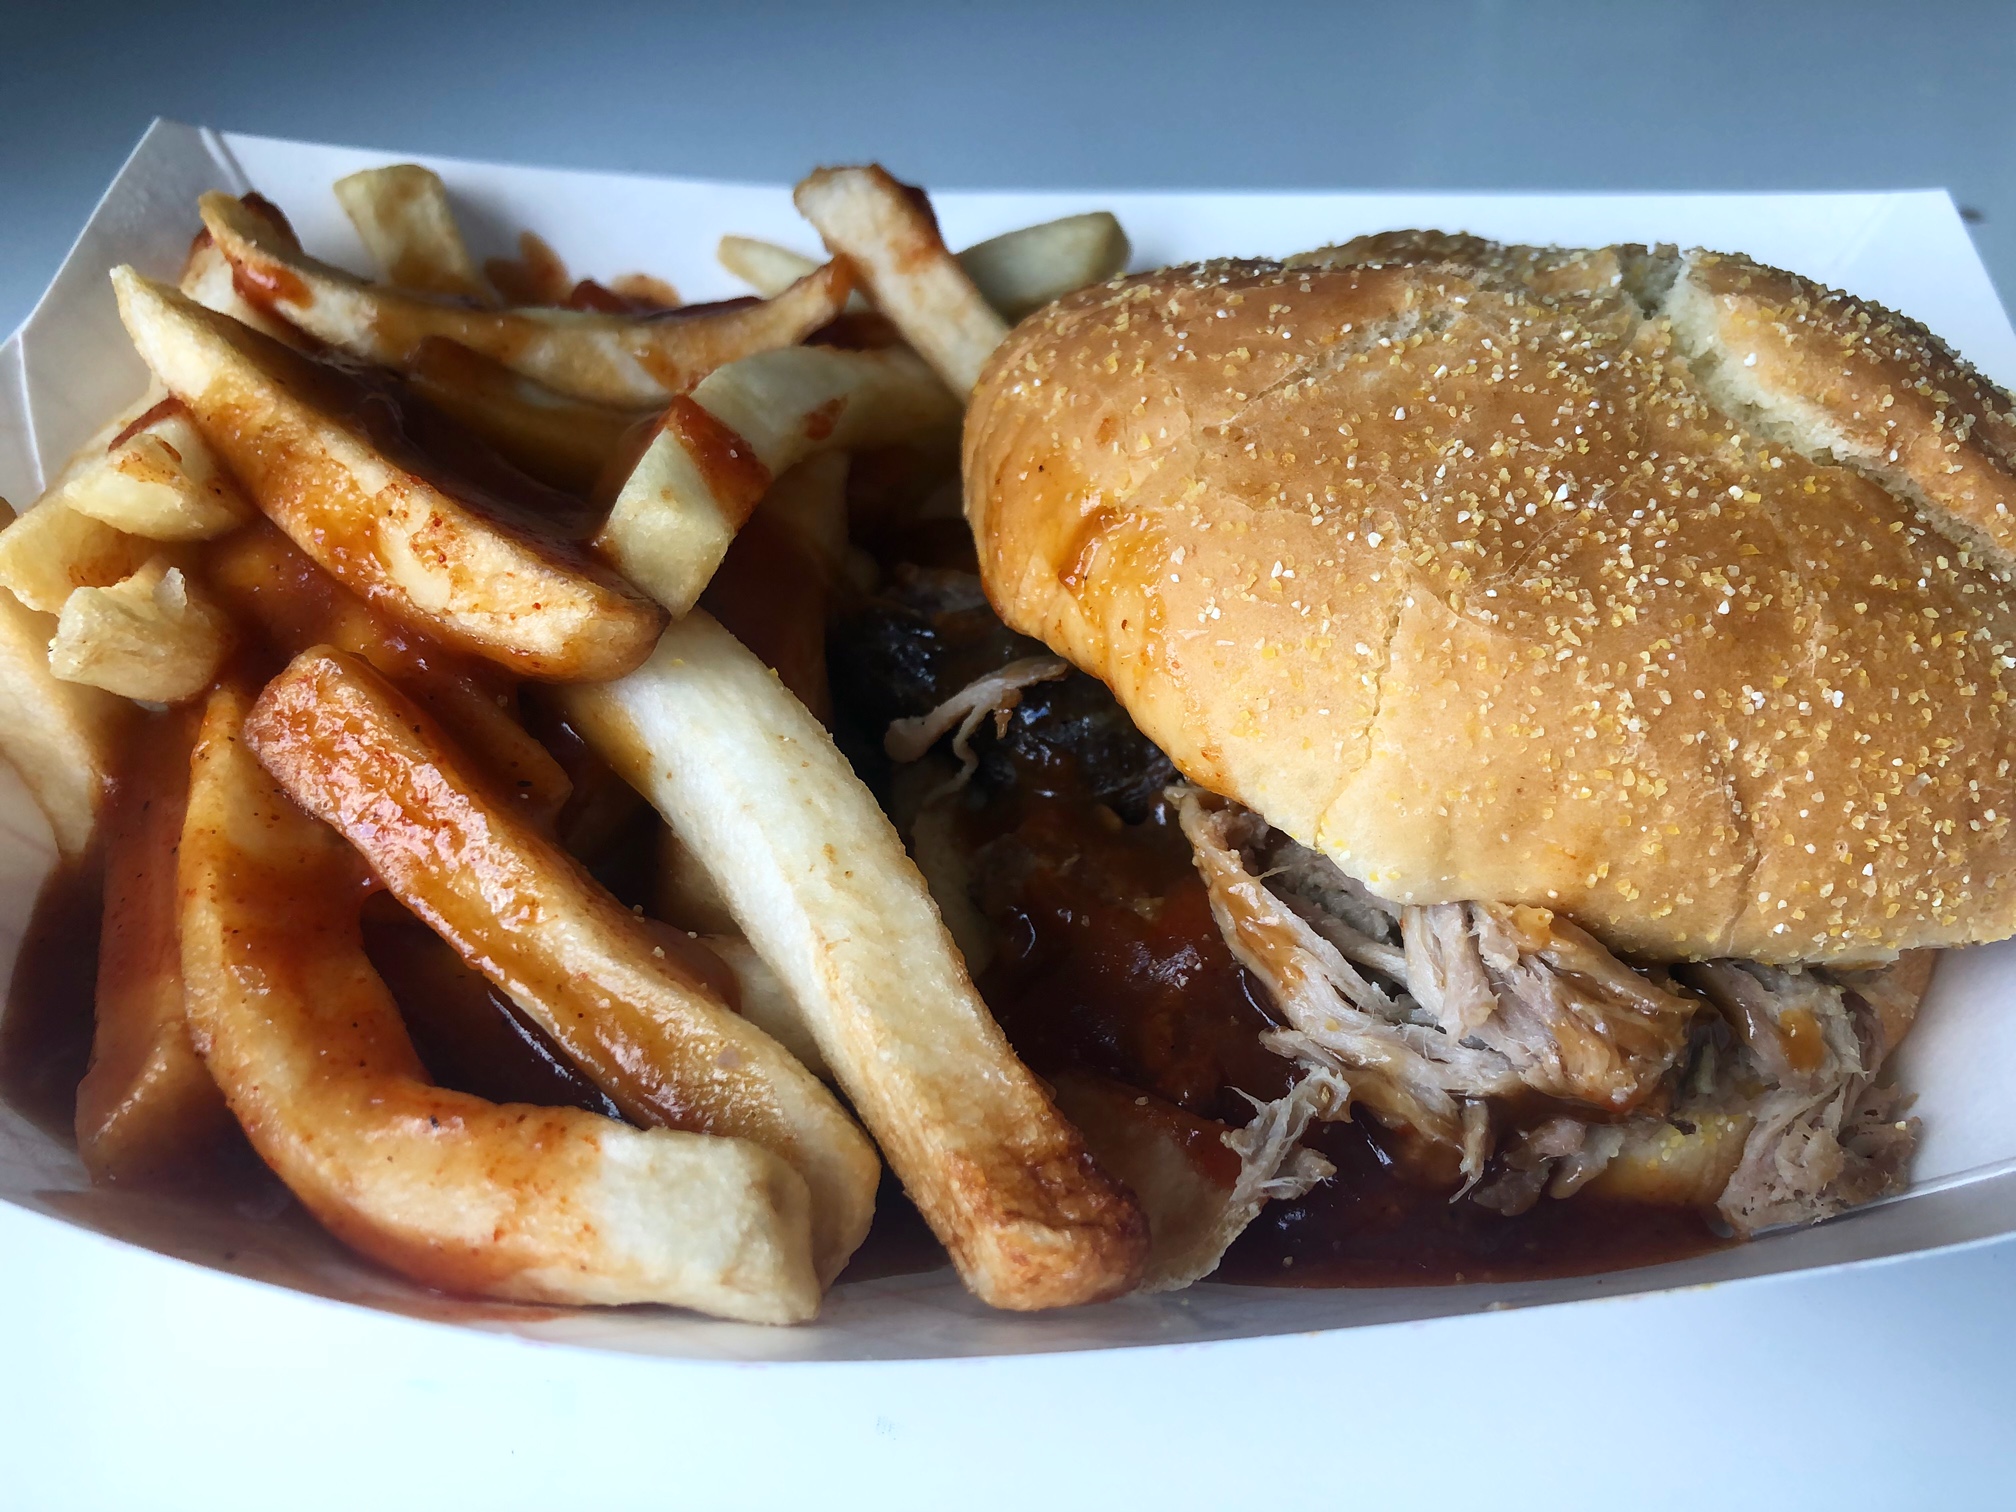 In a small paper tray, there are fries covered in barbeque sauce beside pulled pork sandwich from Wood N Hog. Photo by Alyssa Buckley.